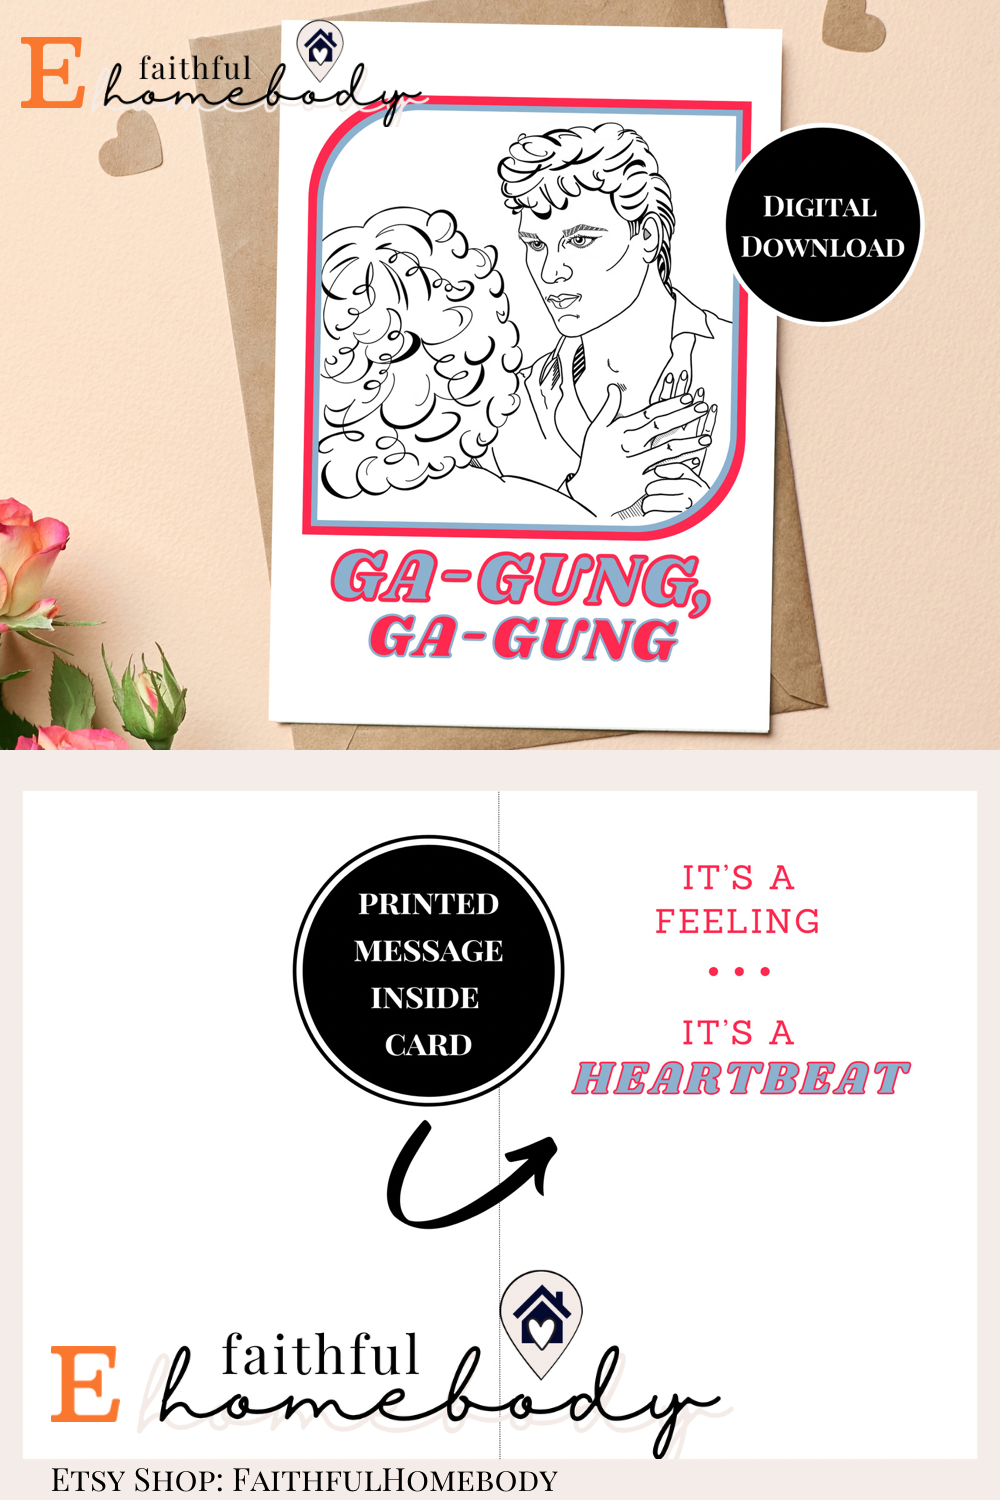 last minute valentines dirty dancing inspired cards.  At the top, a hand-drawn image of Johnny (Patrick Swayze) & Baby (Jennifer Gray).  Johnny is holding Baby's hand to his chest.  He is looking into her eyes.  The Text, "Ga-Gung" is printed below the image, two times.  The colored border around the image is hot pink and light blue.  The text is printed in hot pink and light blue.

On the bottom, the inside message of the card is "It is a feeling...It is a heartbeat" .  The text is in hot pink and light blue.